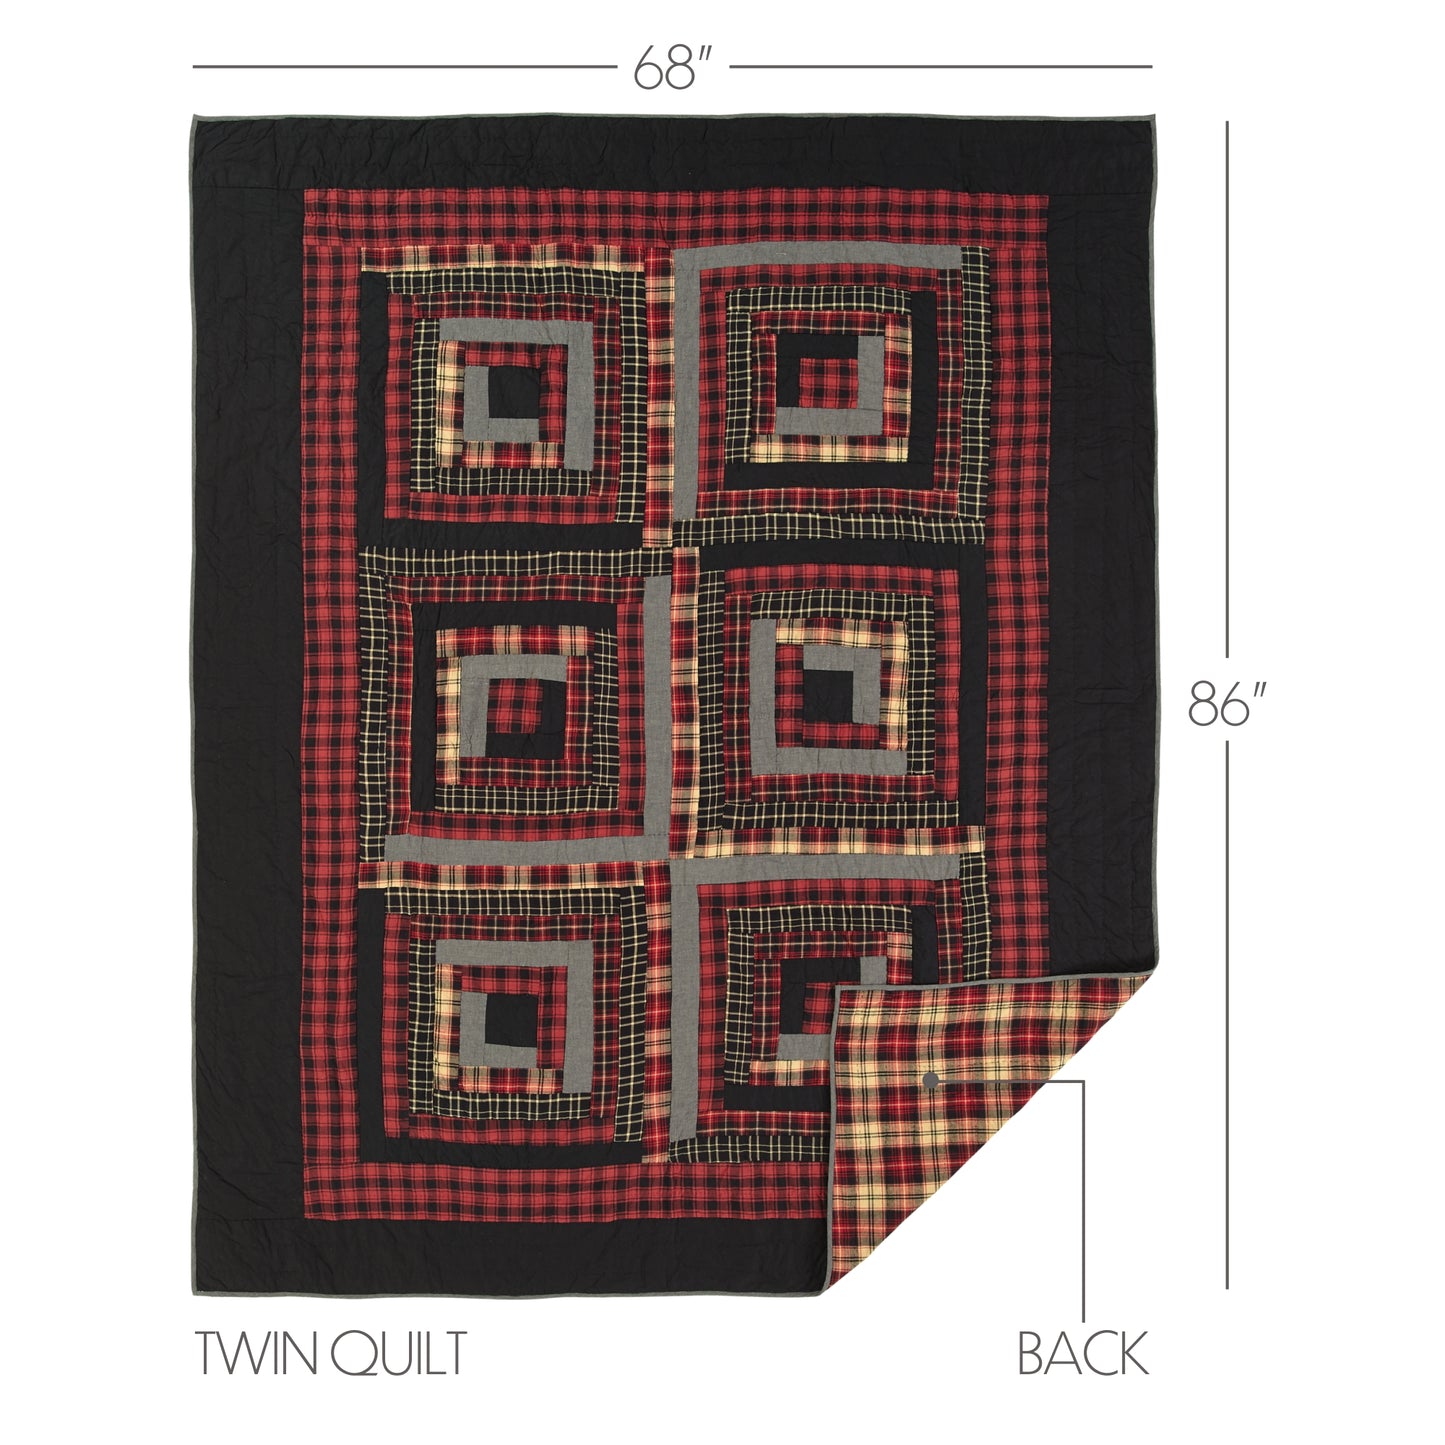 37864-Cumberland-Twin-Quilt-68Wx86L-image-1